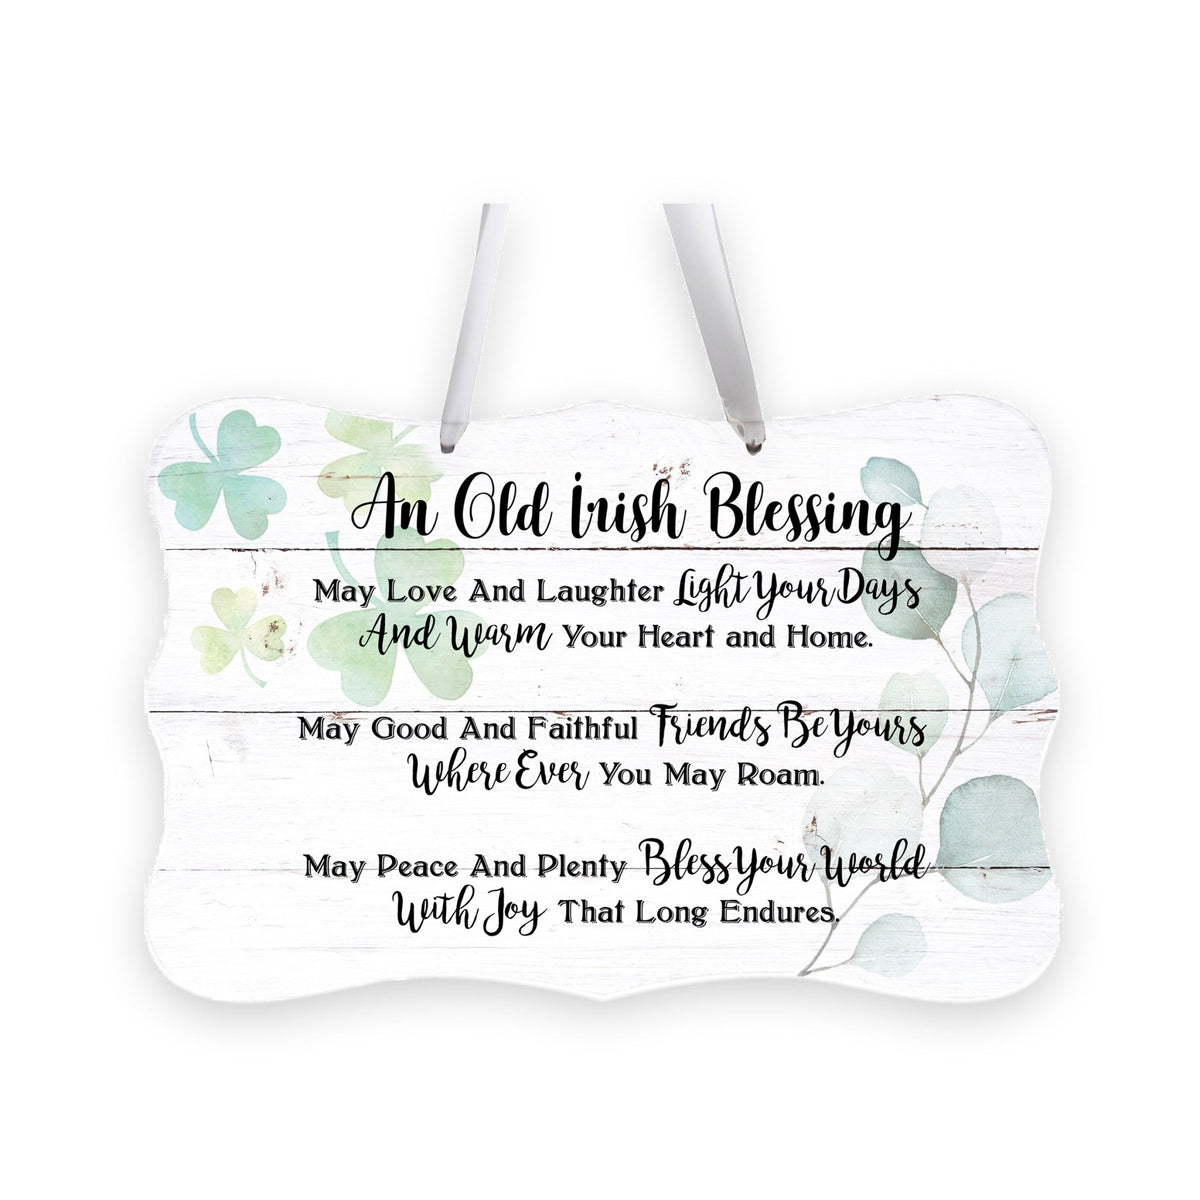 St. Patrick’s Day Irish Everyday Distressed Ribbon Wall Sign 8x12 - An Old Irish Blessing - LifeSong Milestones